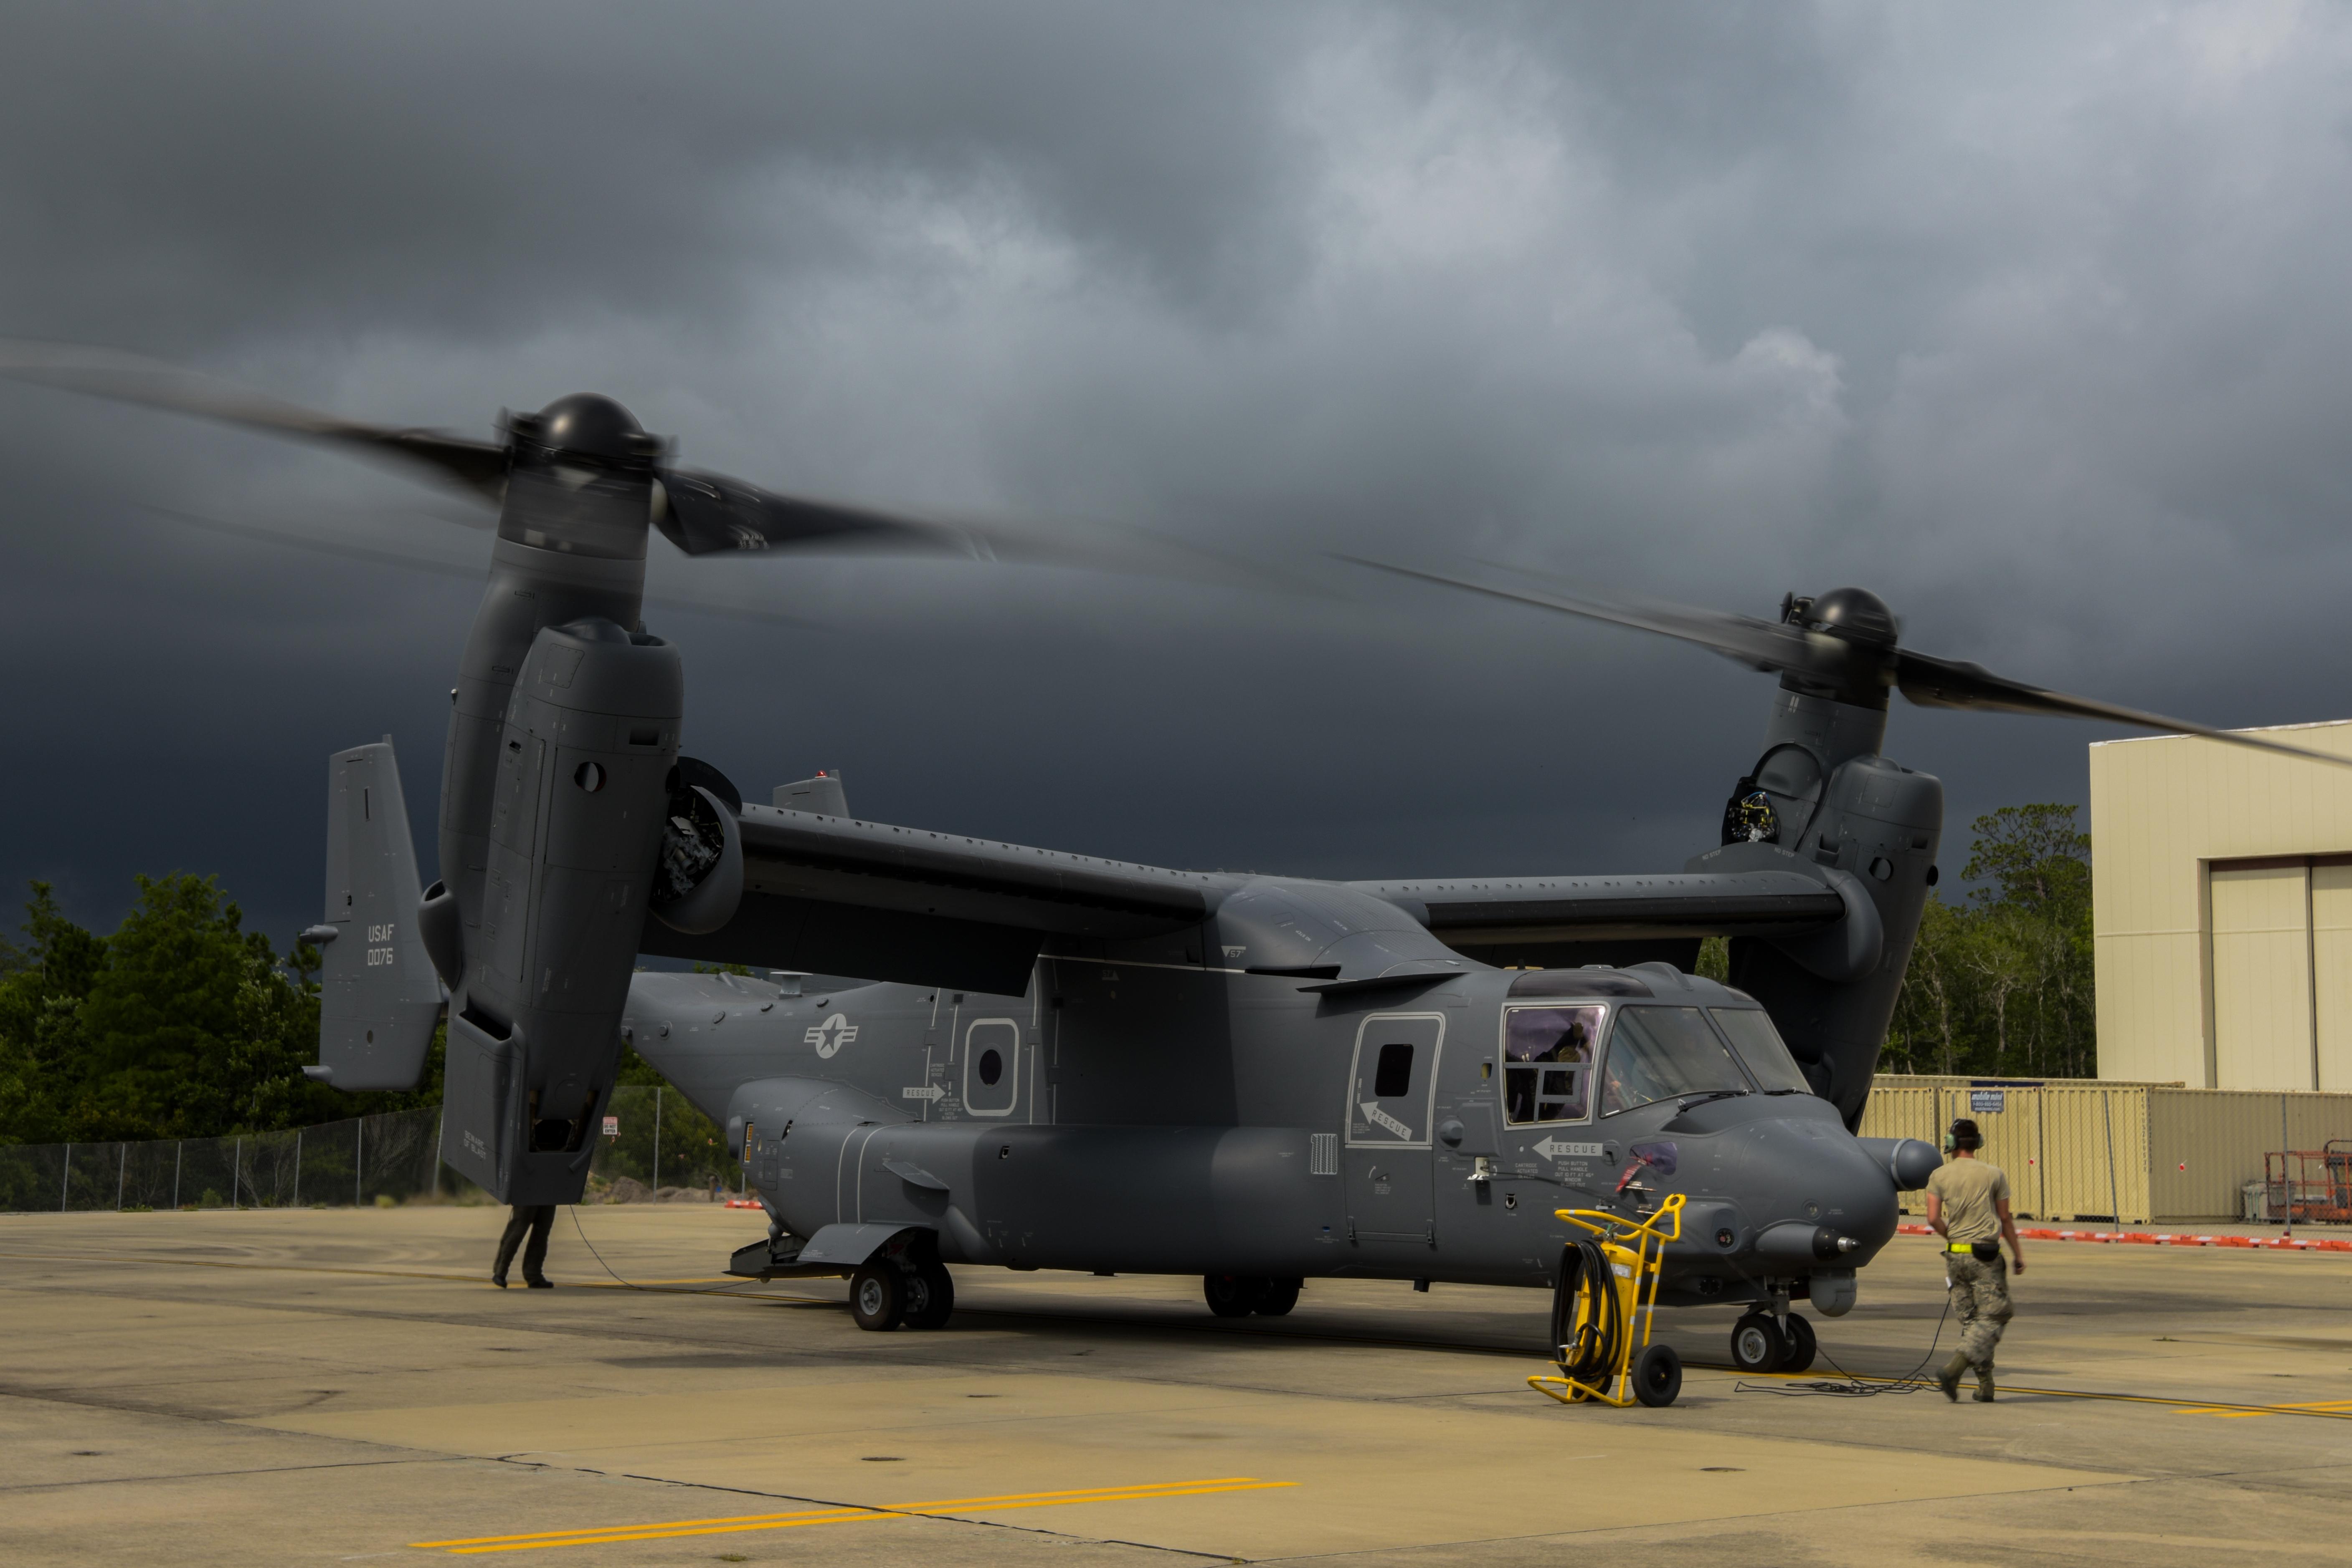 Air Commandos with the 801st Special Operations Aircraft Maintenance Squadron accept delivery of a new CV-22B Osprey tiltrotor aircraft at Hurlburt Field, Florida, Jun. 2, 2020. The 801st SOAMXS helps keep Ospreys ready to execute infiltration, exfiltration, and resupply missions worldwide. (U.S. Air Force photo by Airman 1st Class Nathan LeVang)